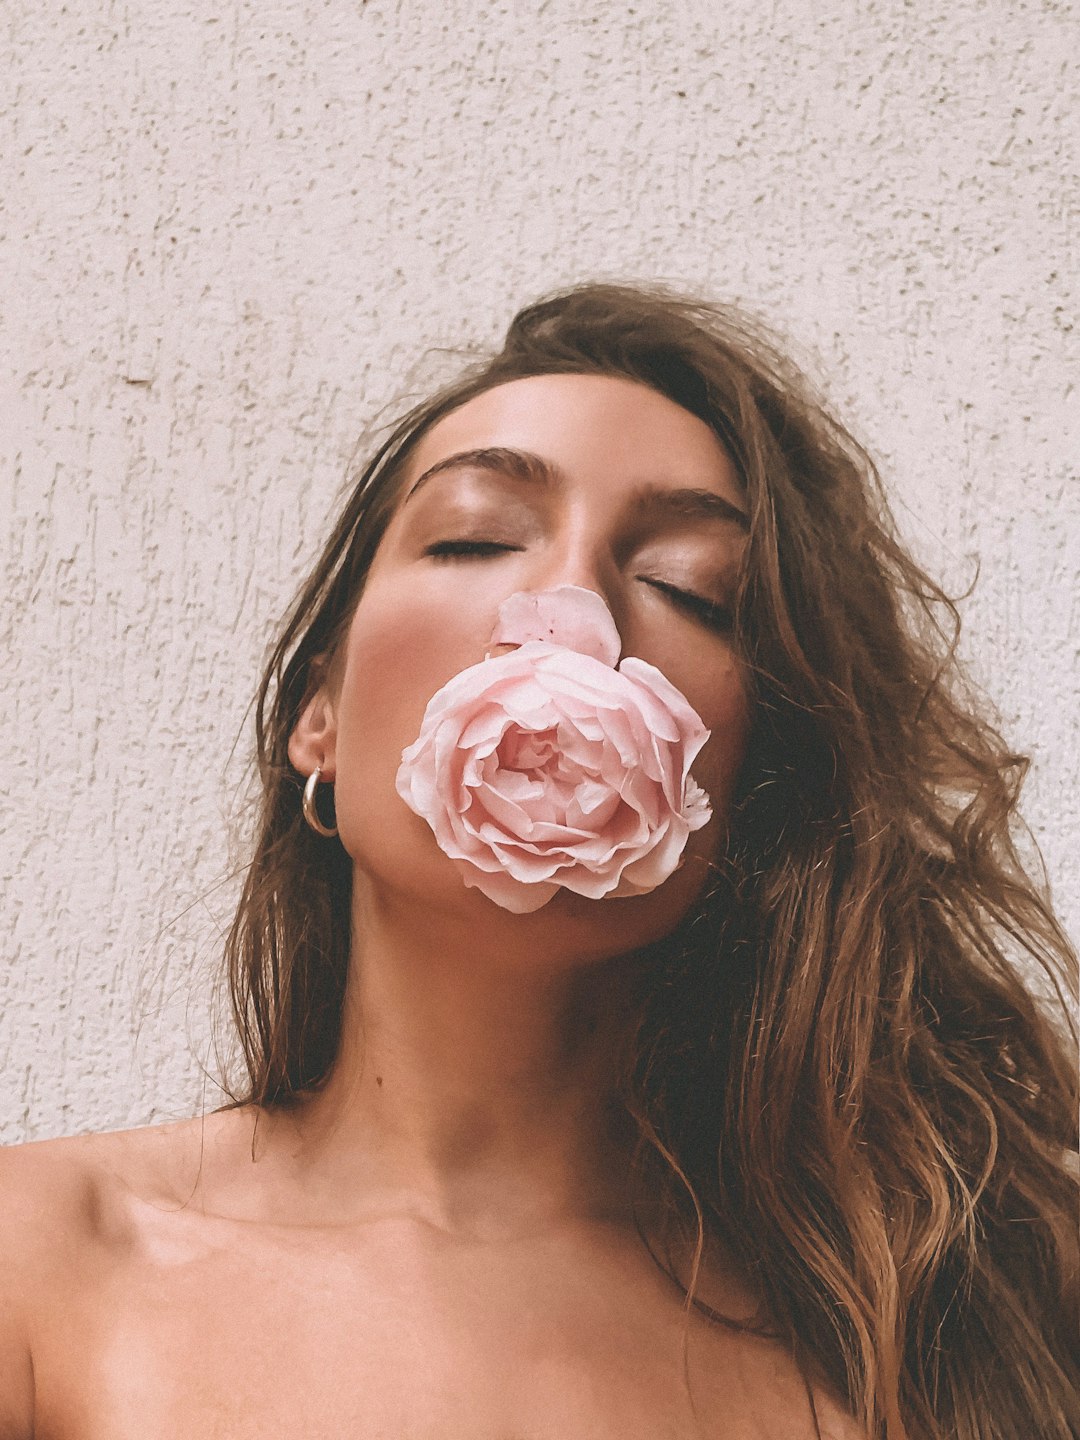 woman with pink rose on her mouth